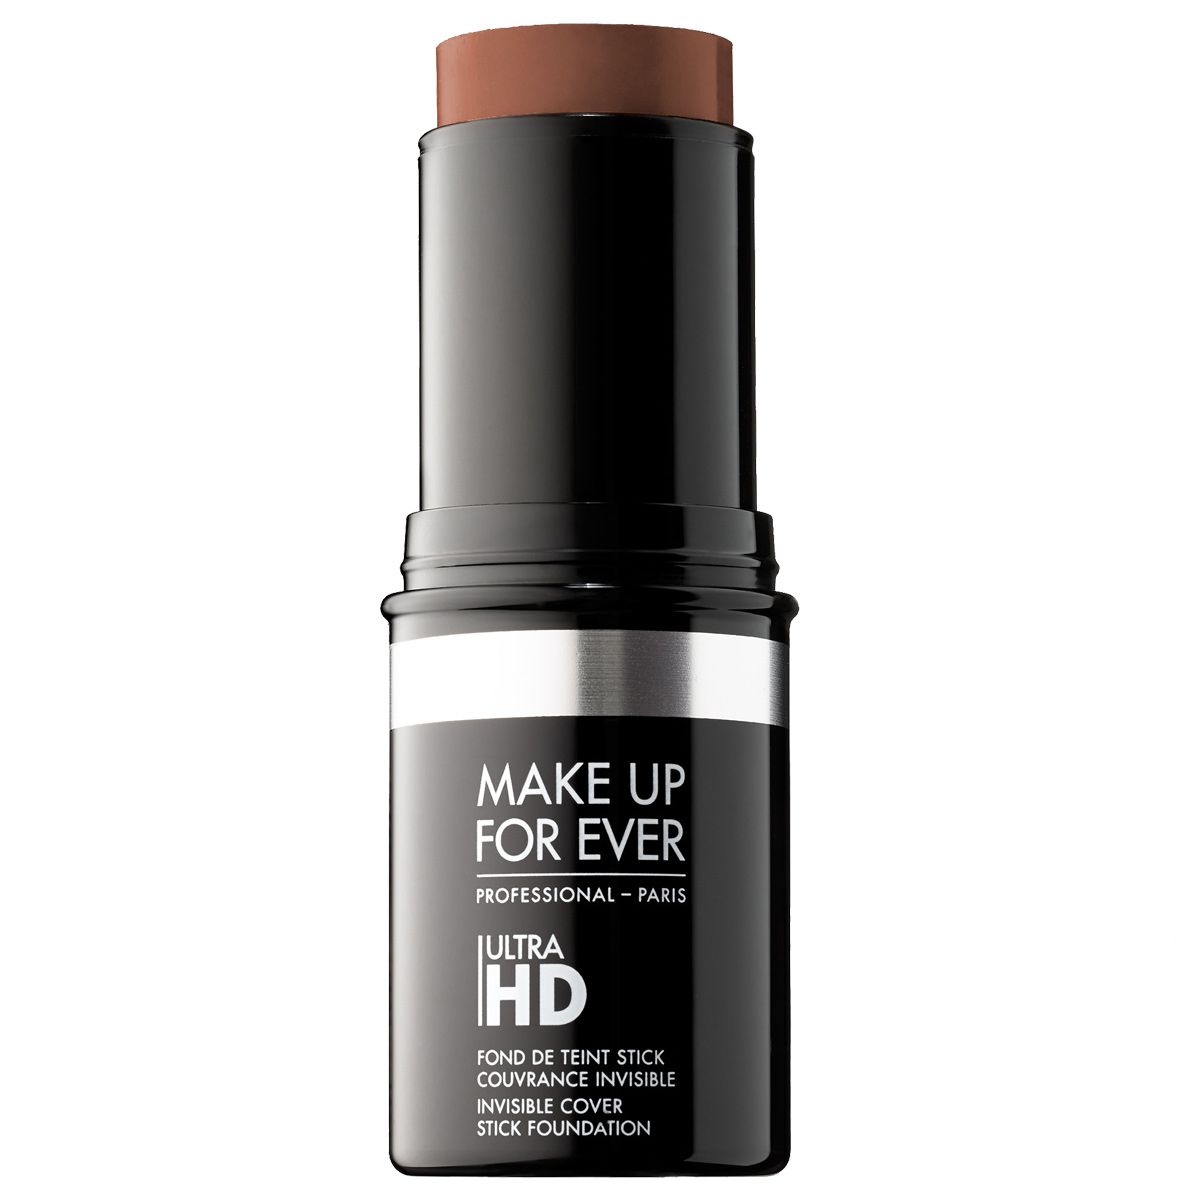 Make Up For Ever Ultra HD Invisible Cover Stick